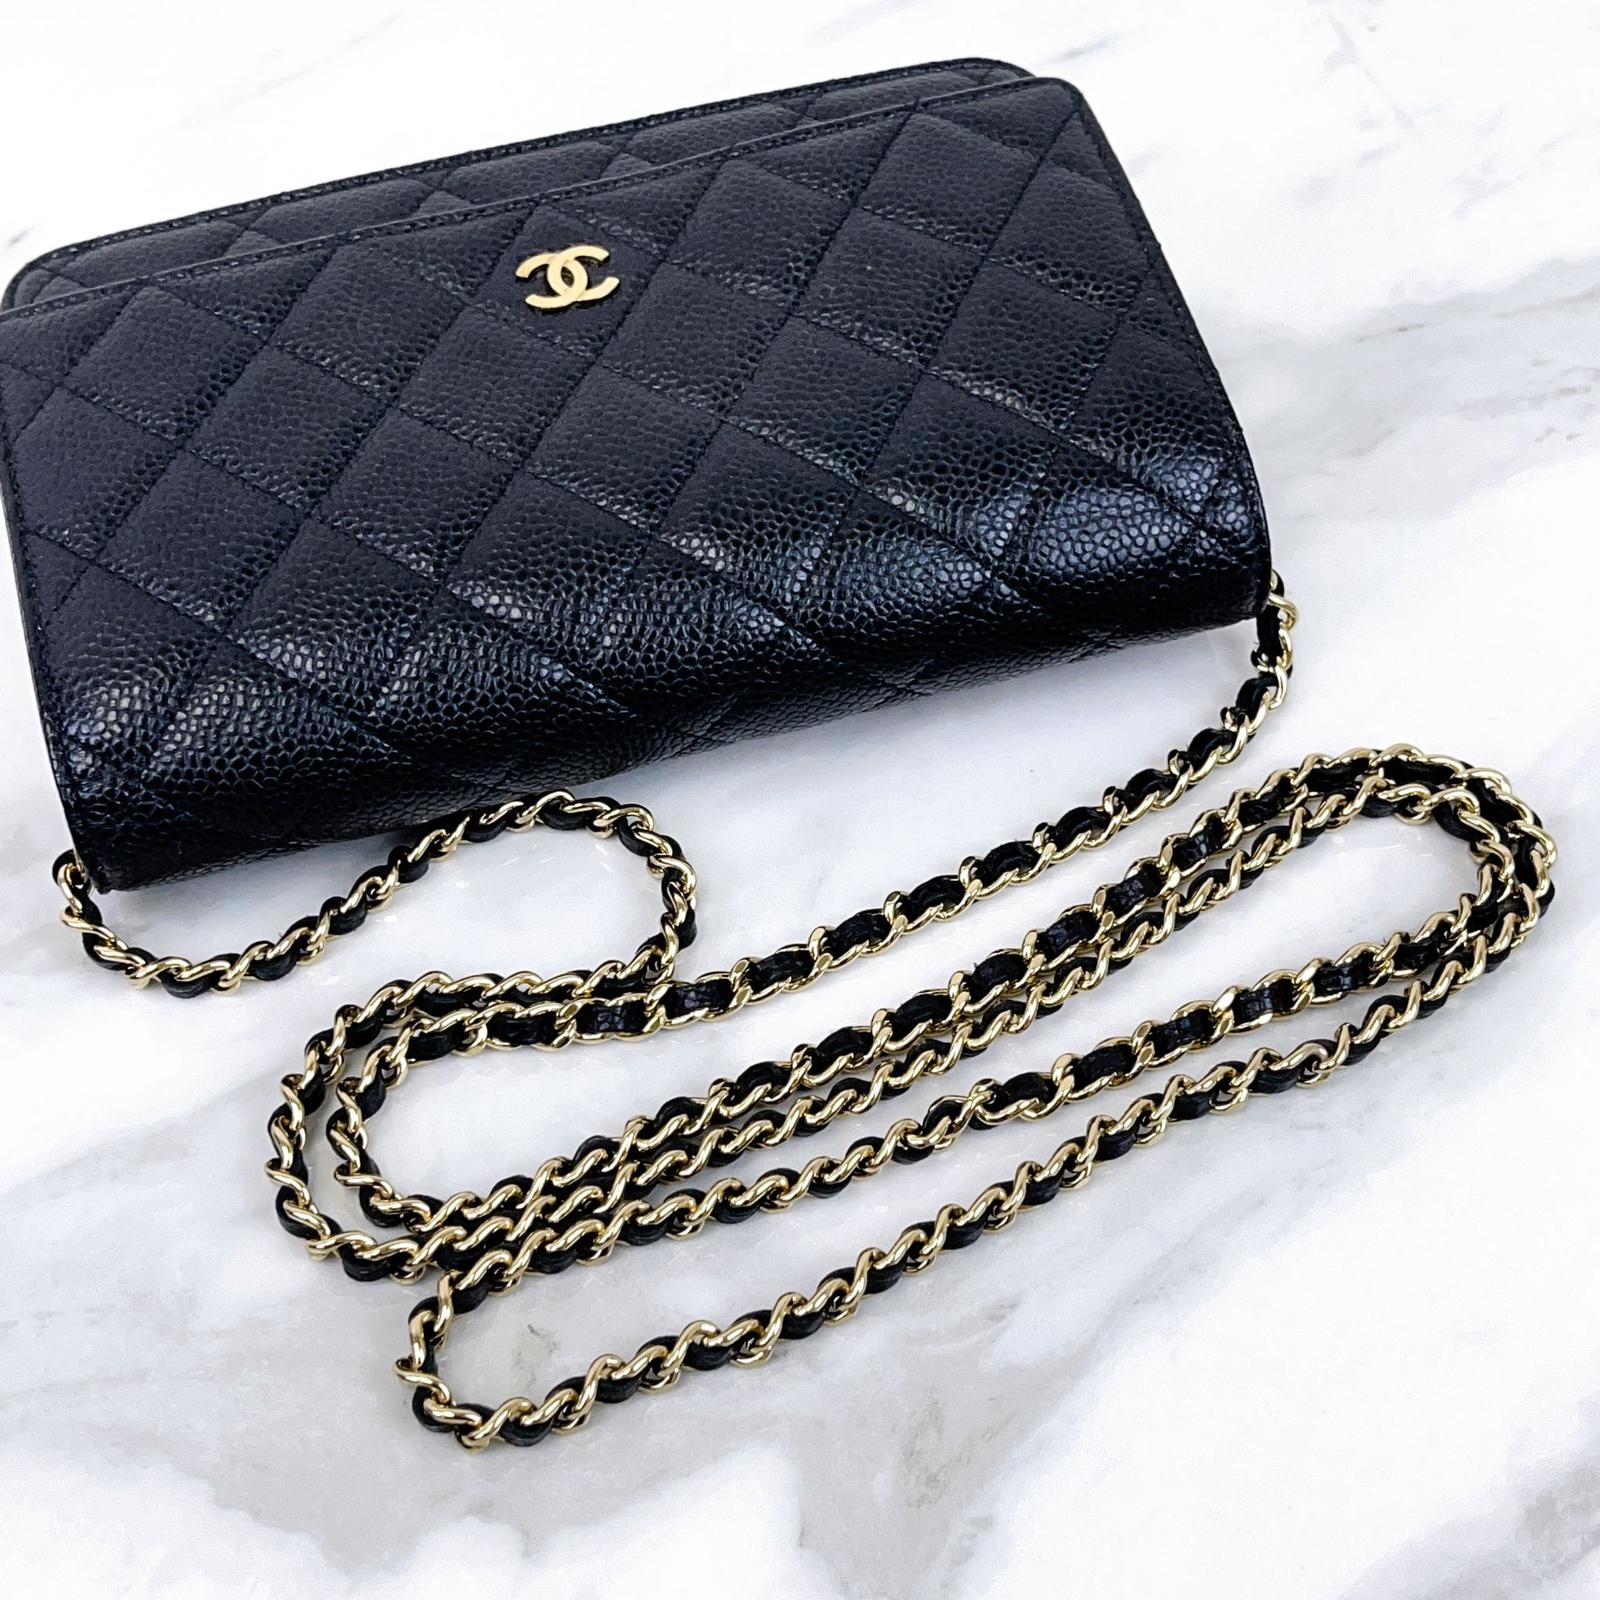 Chanel Wallet On Chain WOC